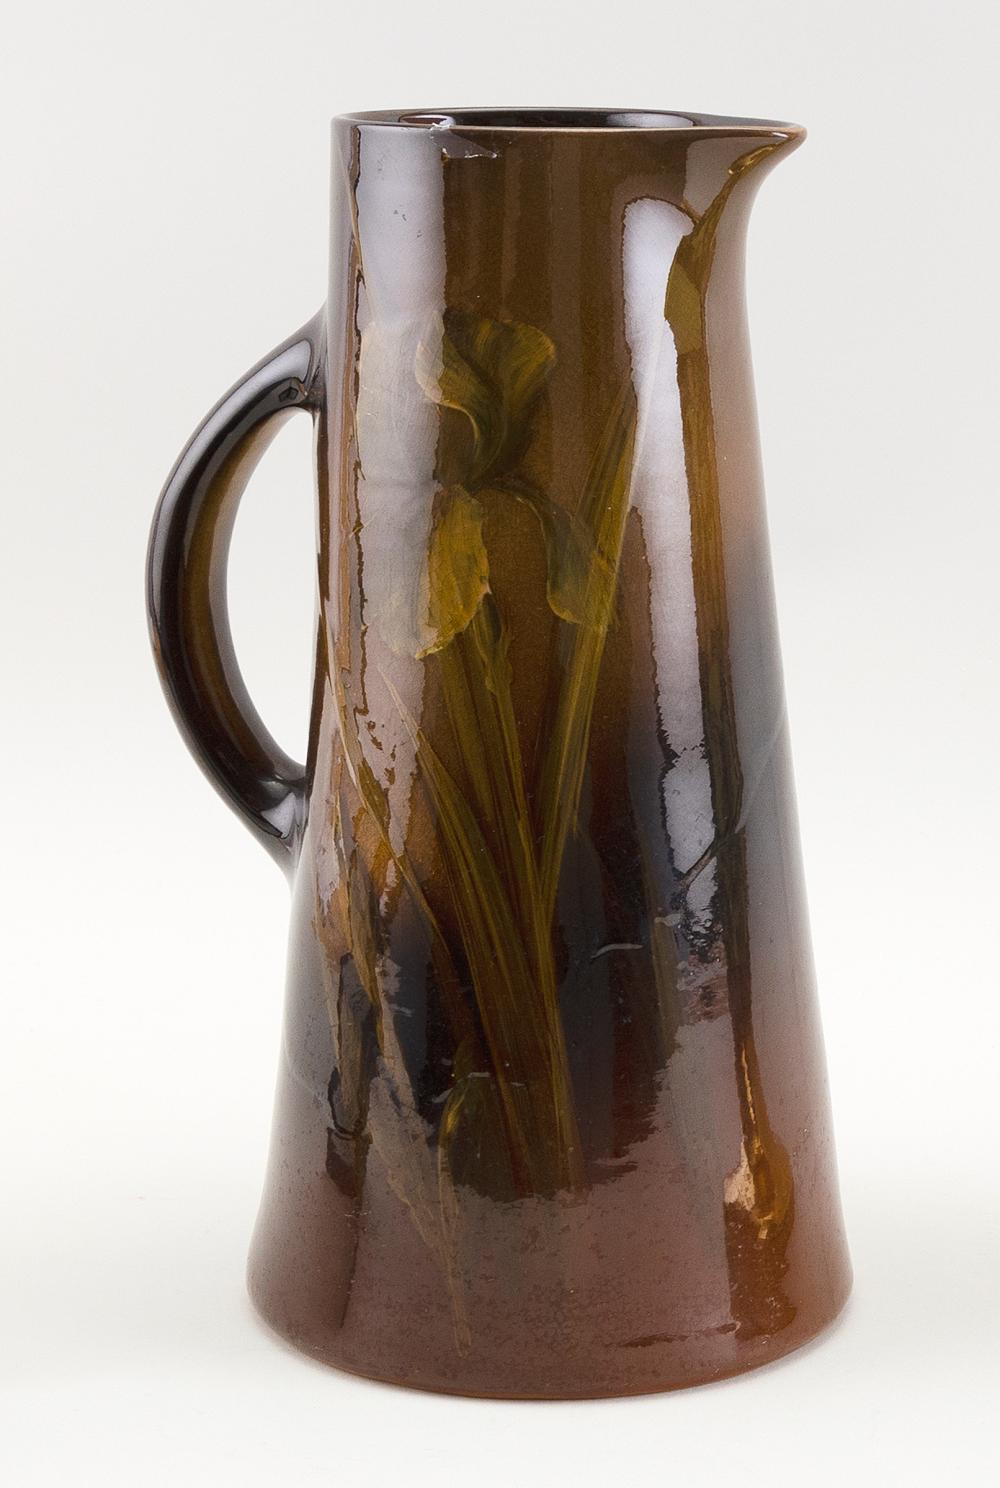 WELLER POTTERY PITCHER 20TH CENTURY